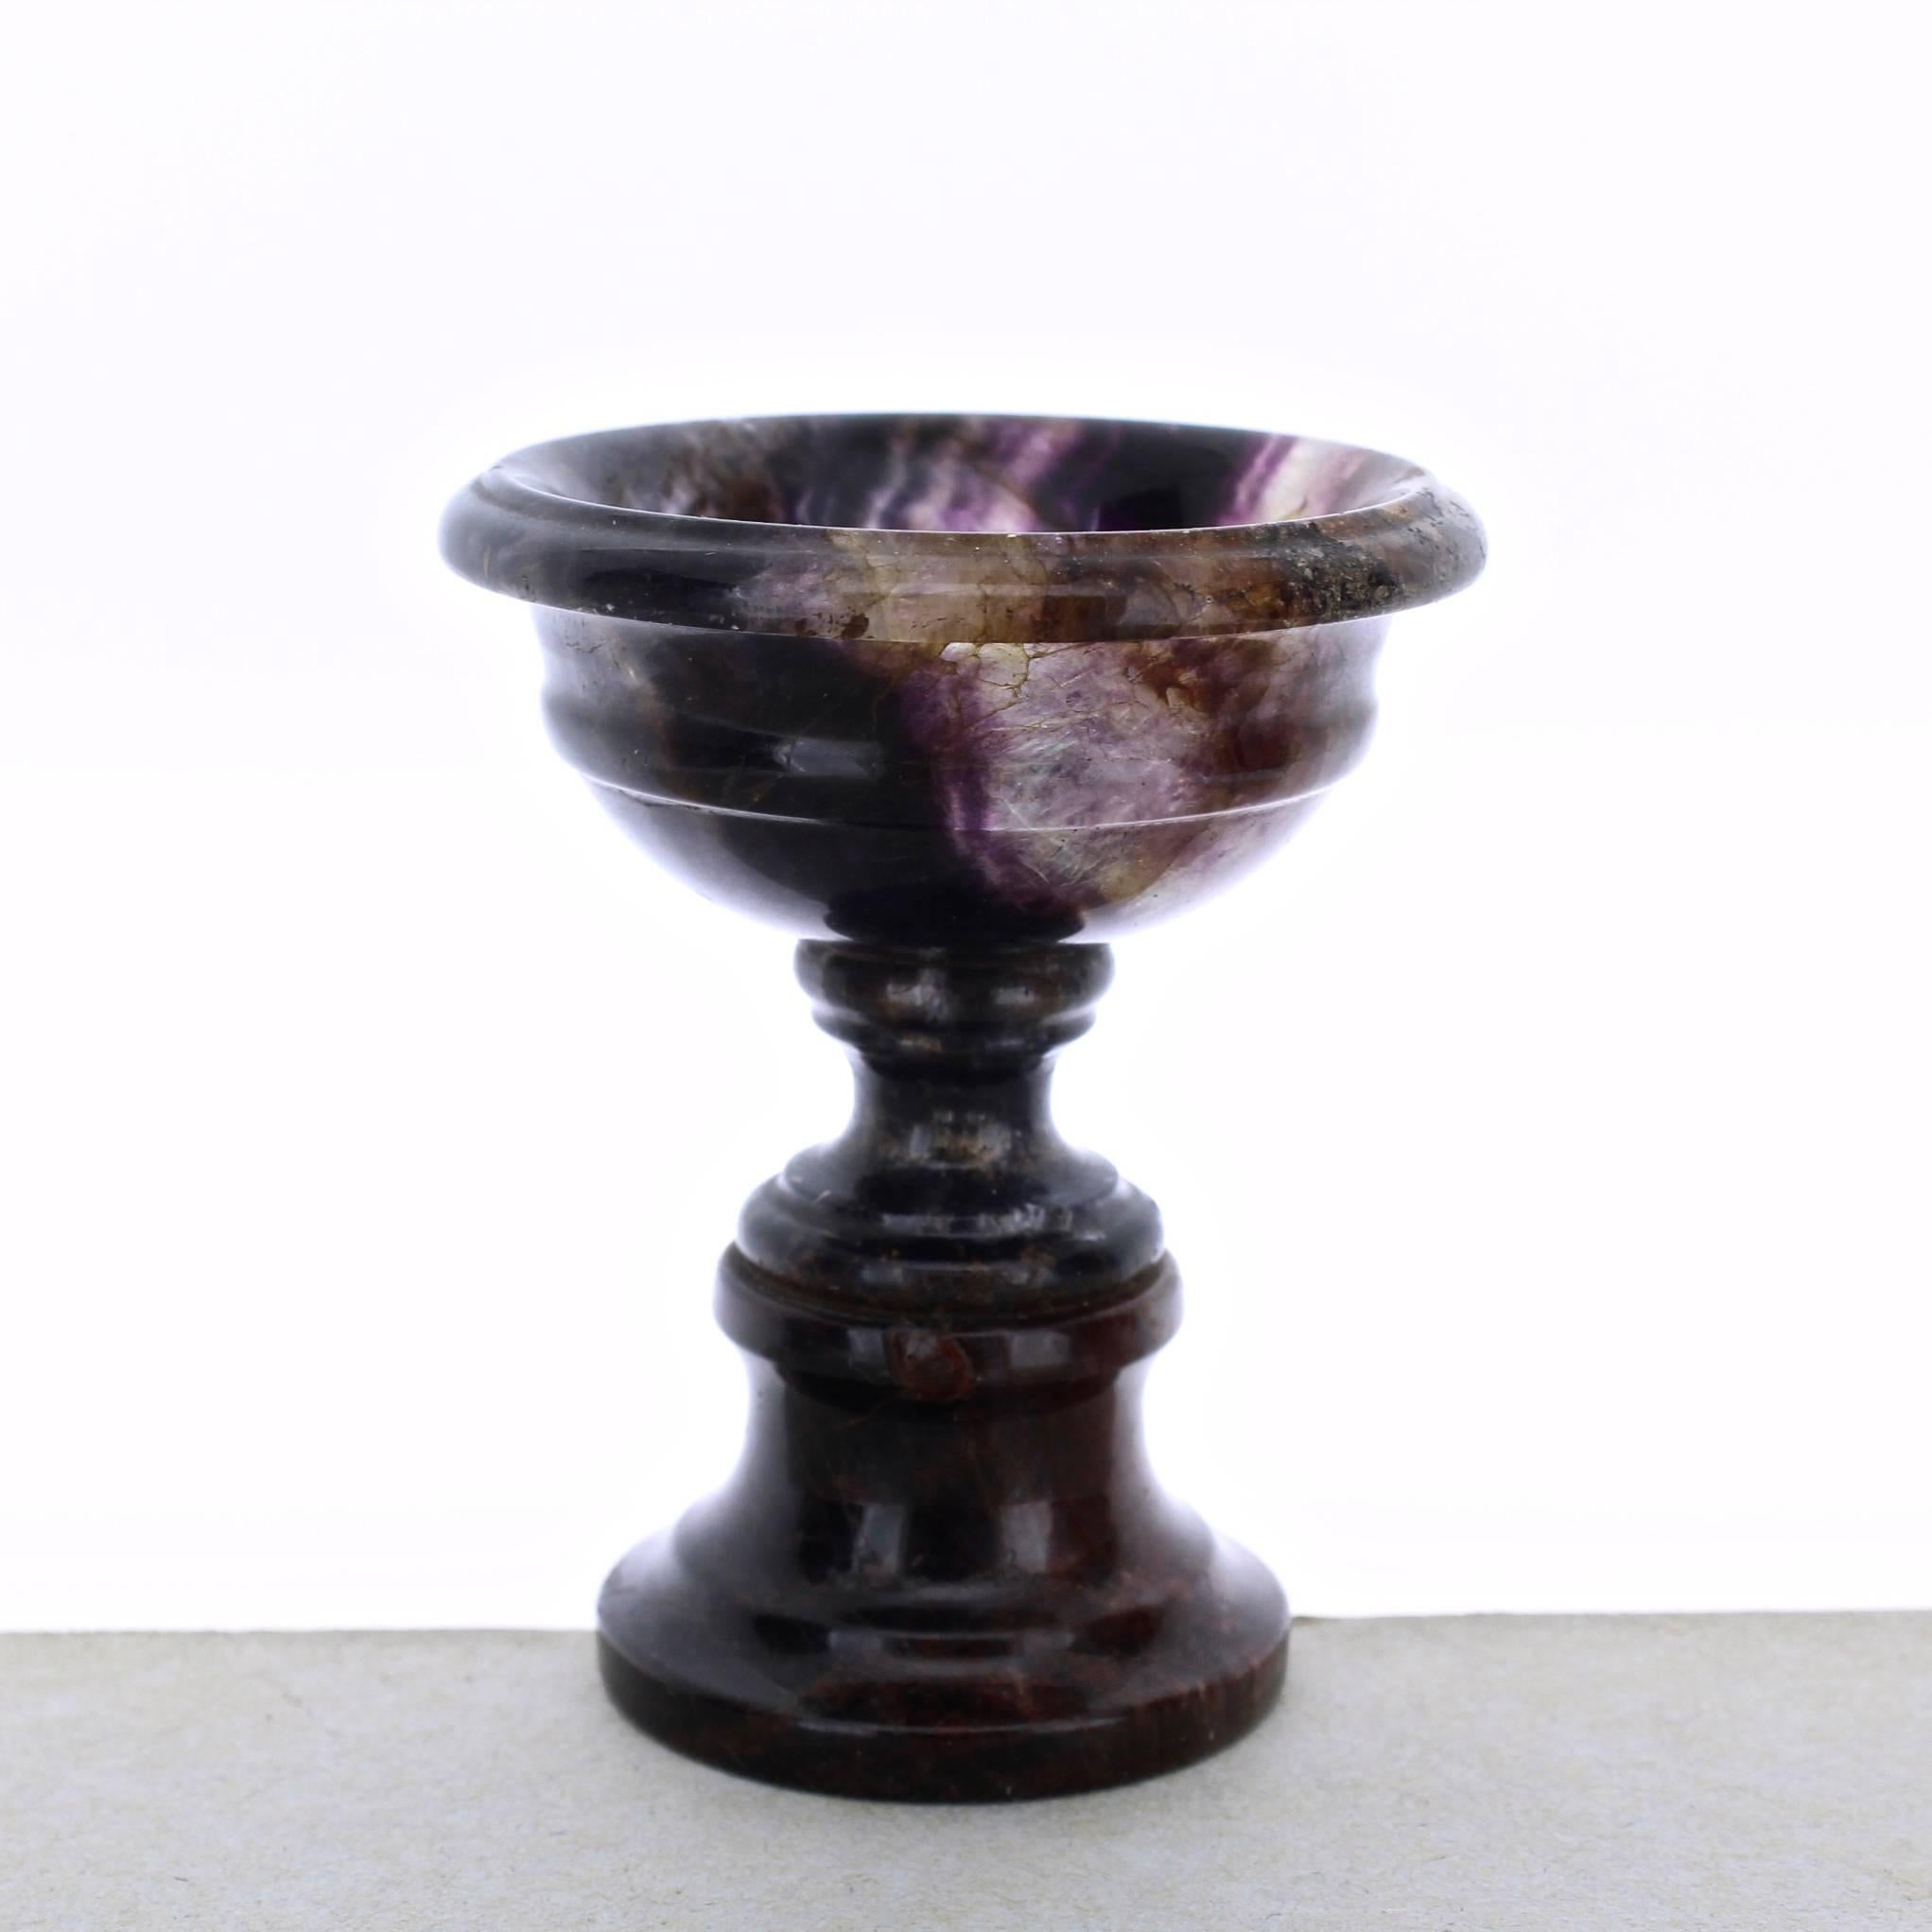 A fine small footed blue john bowl. Possibly a salt cellar on pedestal. 

Likely Regency Period.

Very good color and patterning. 

Height: ca. 3 1/4 in.

Items purchased from David Sterner antiques must delight you. Purchases may be